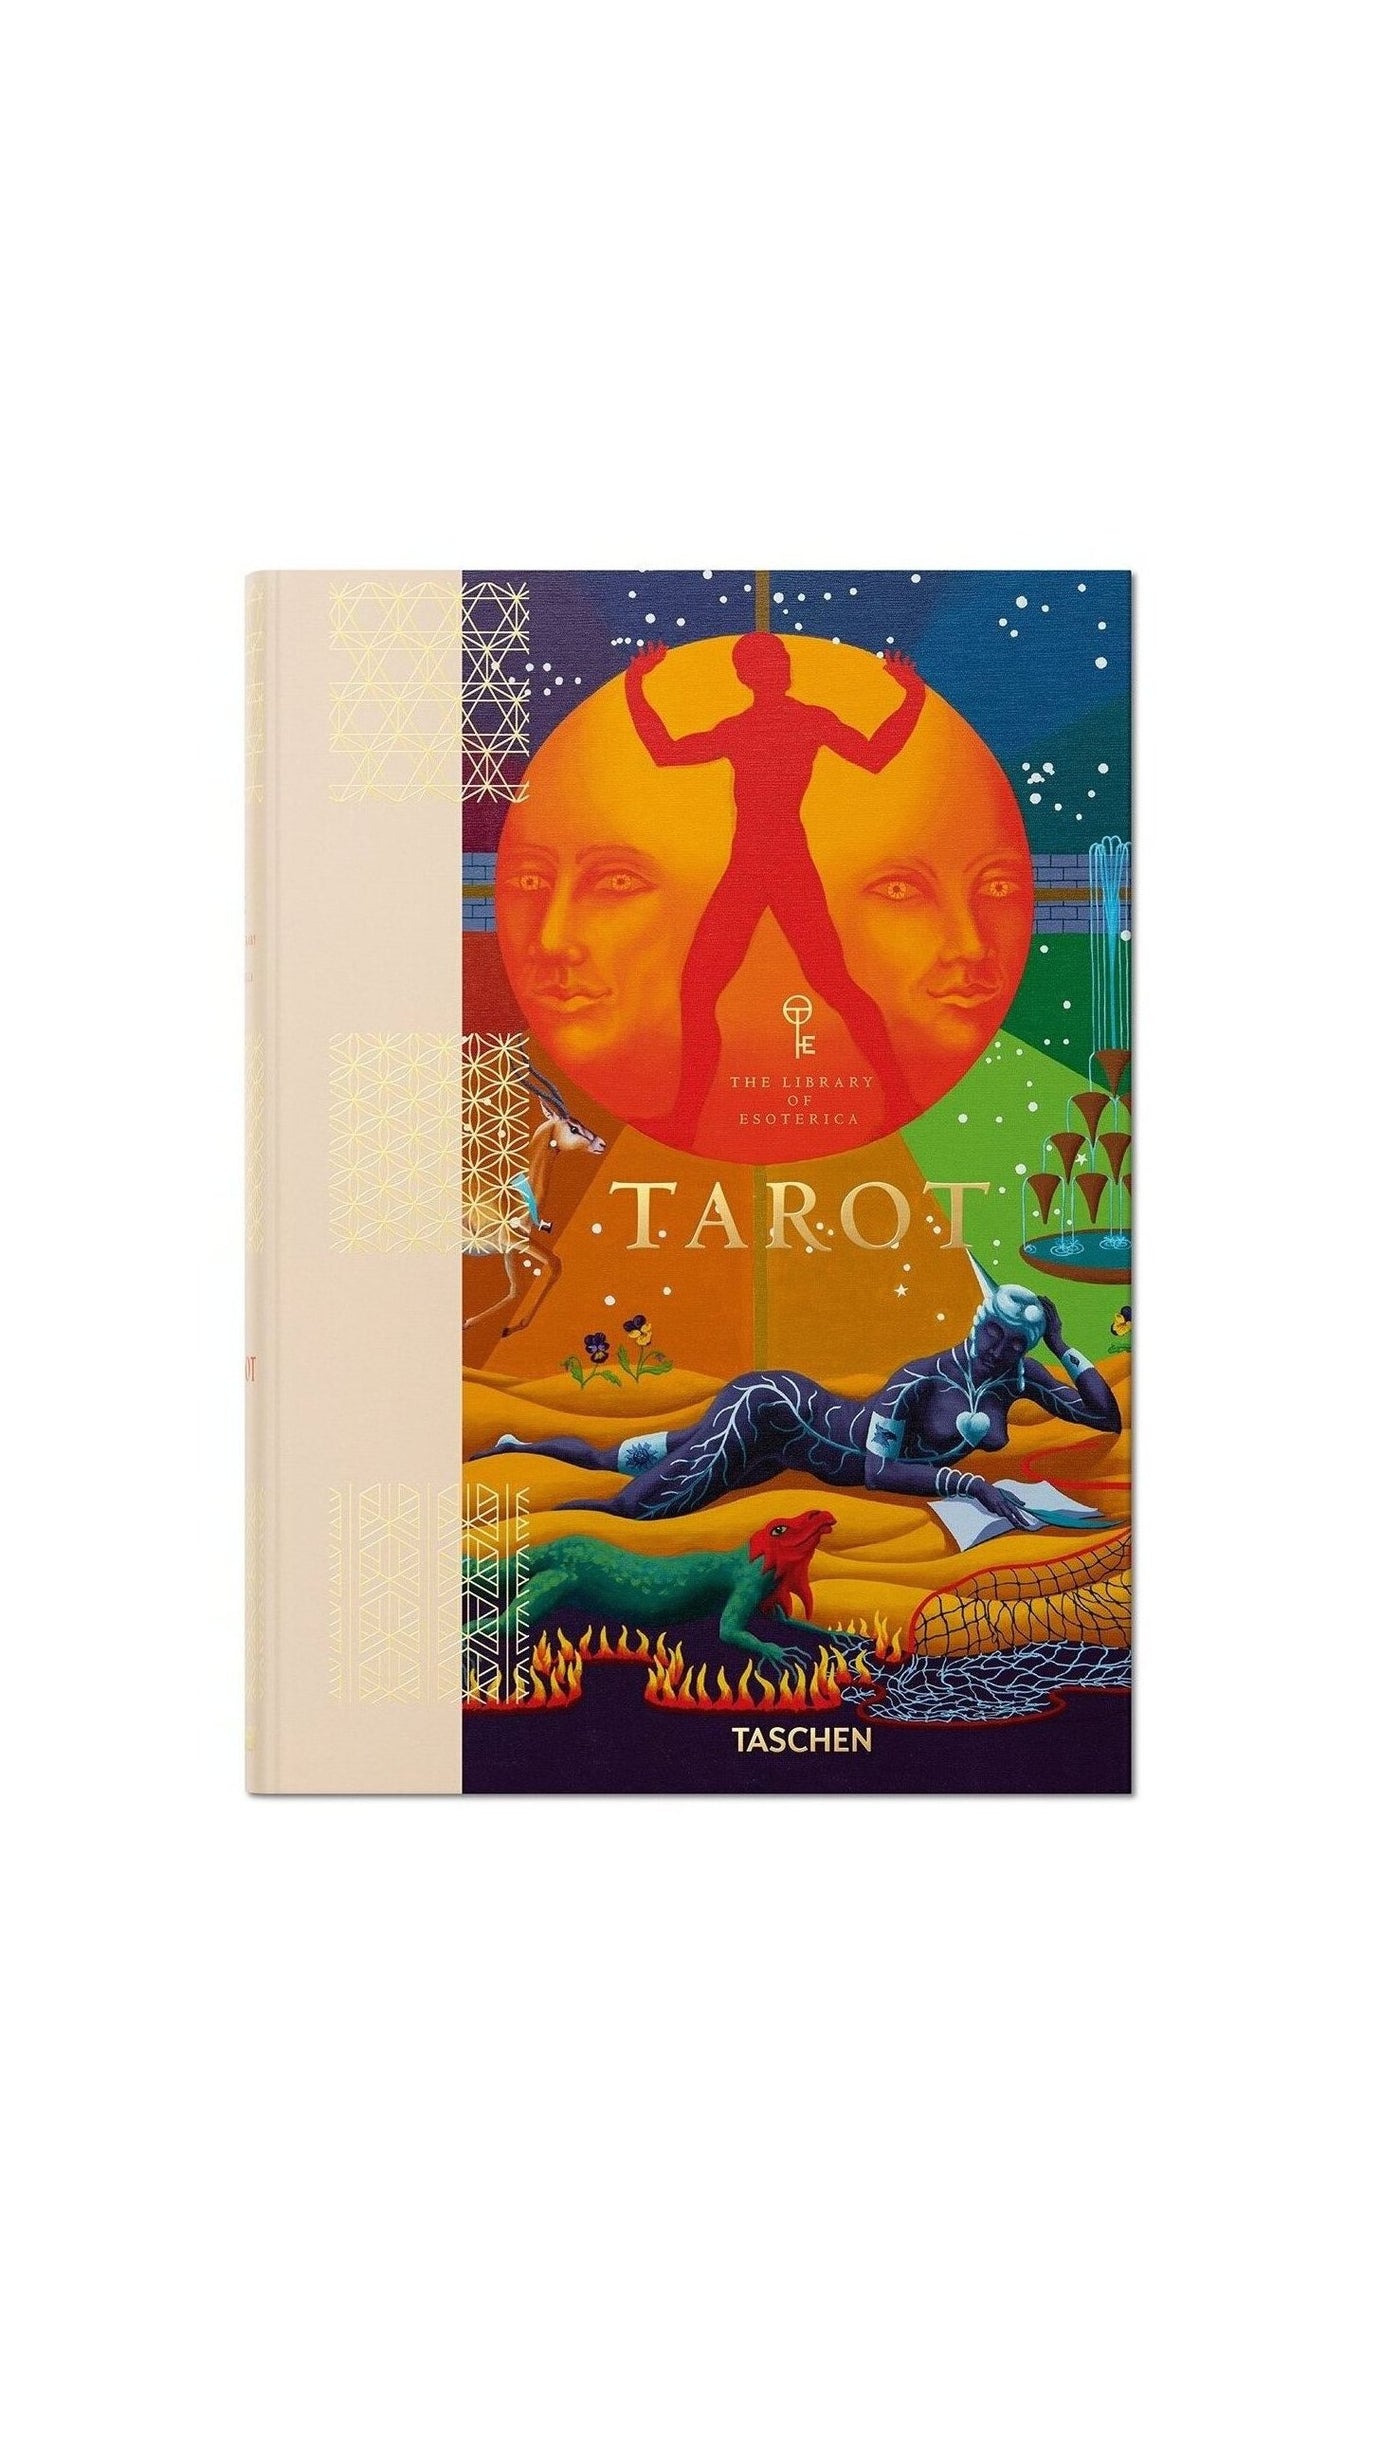 Tarot. The Library of Esoterica.